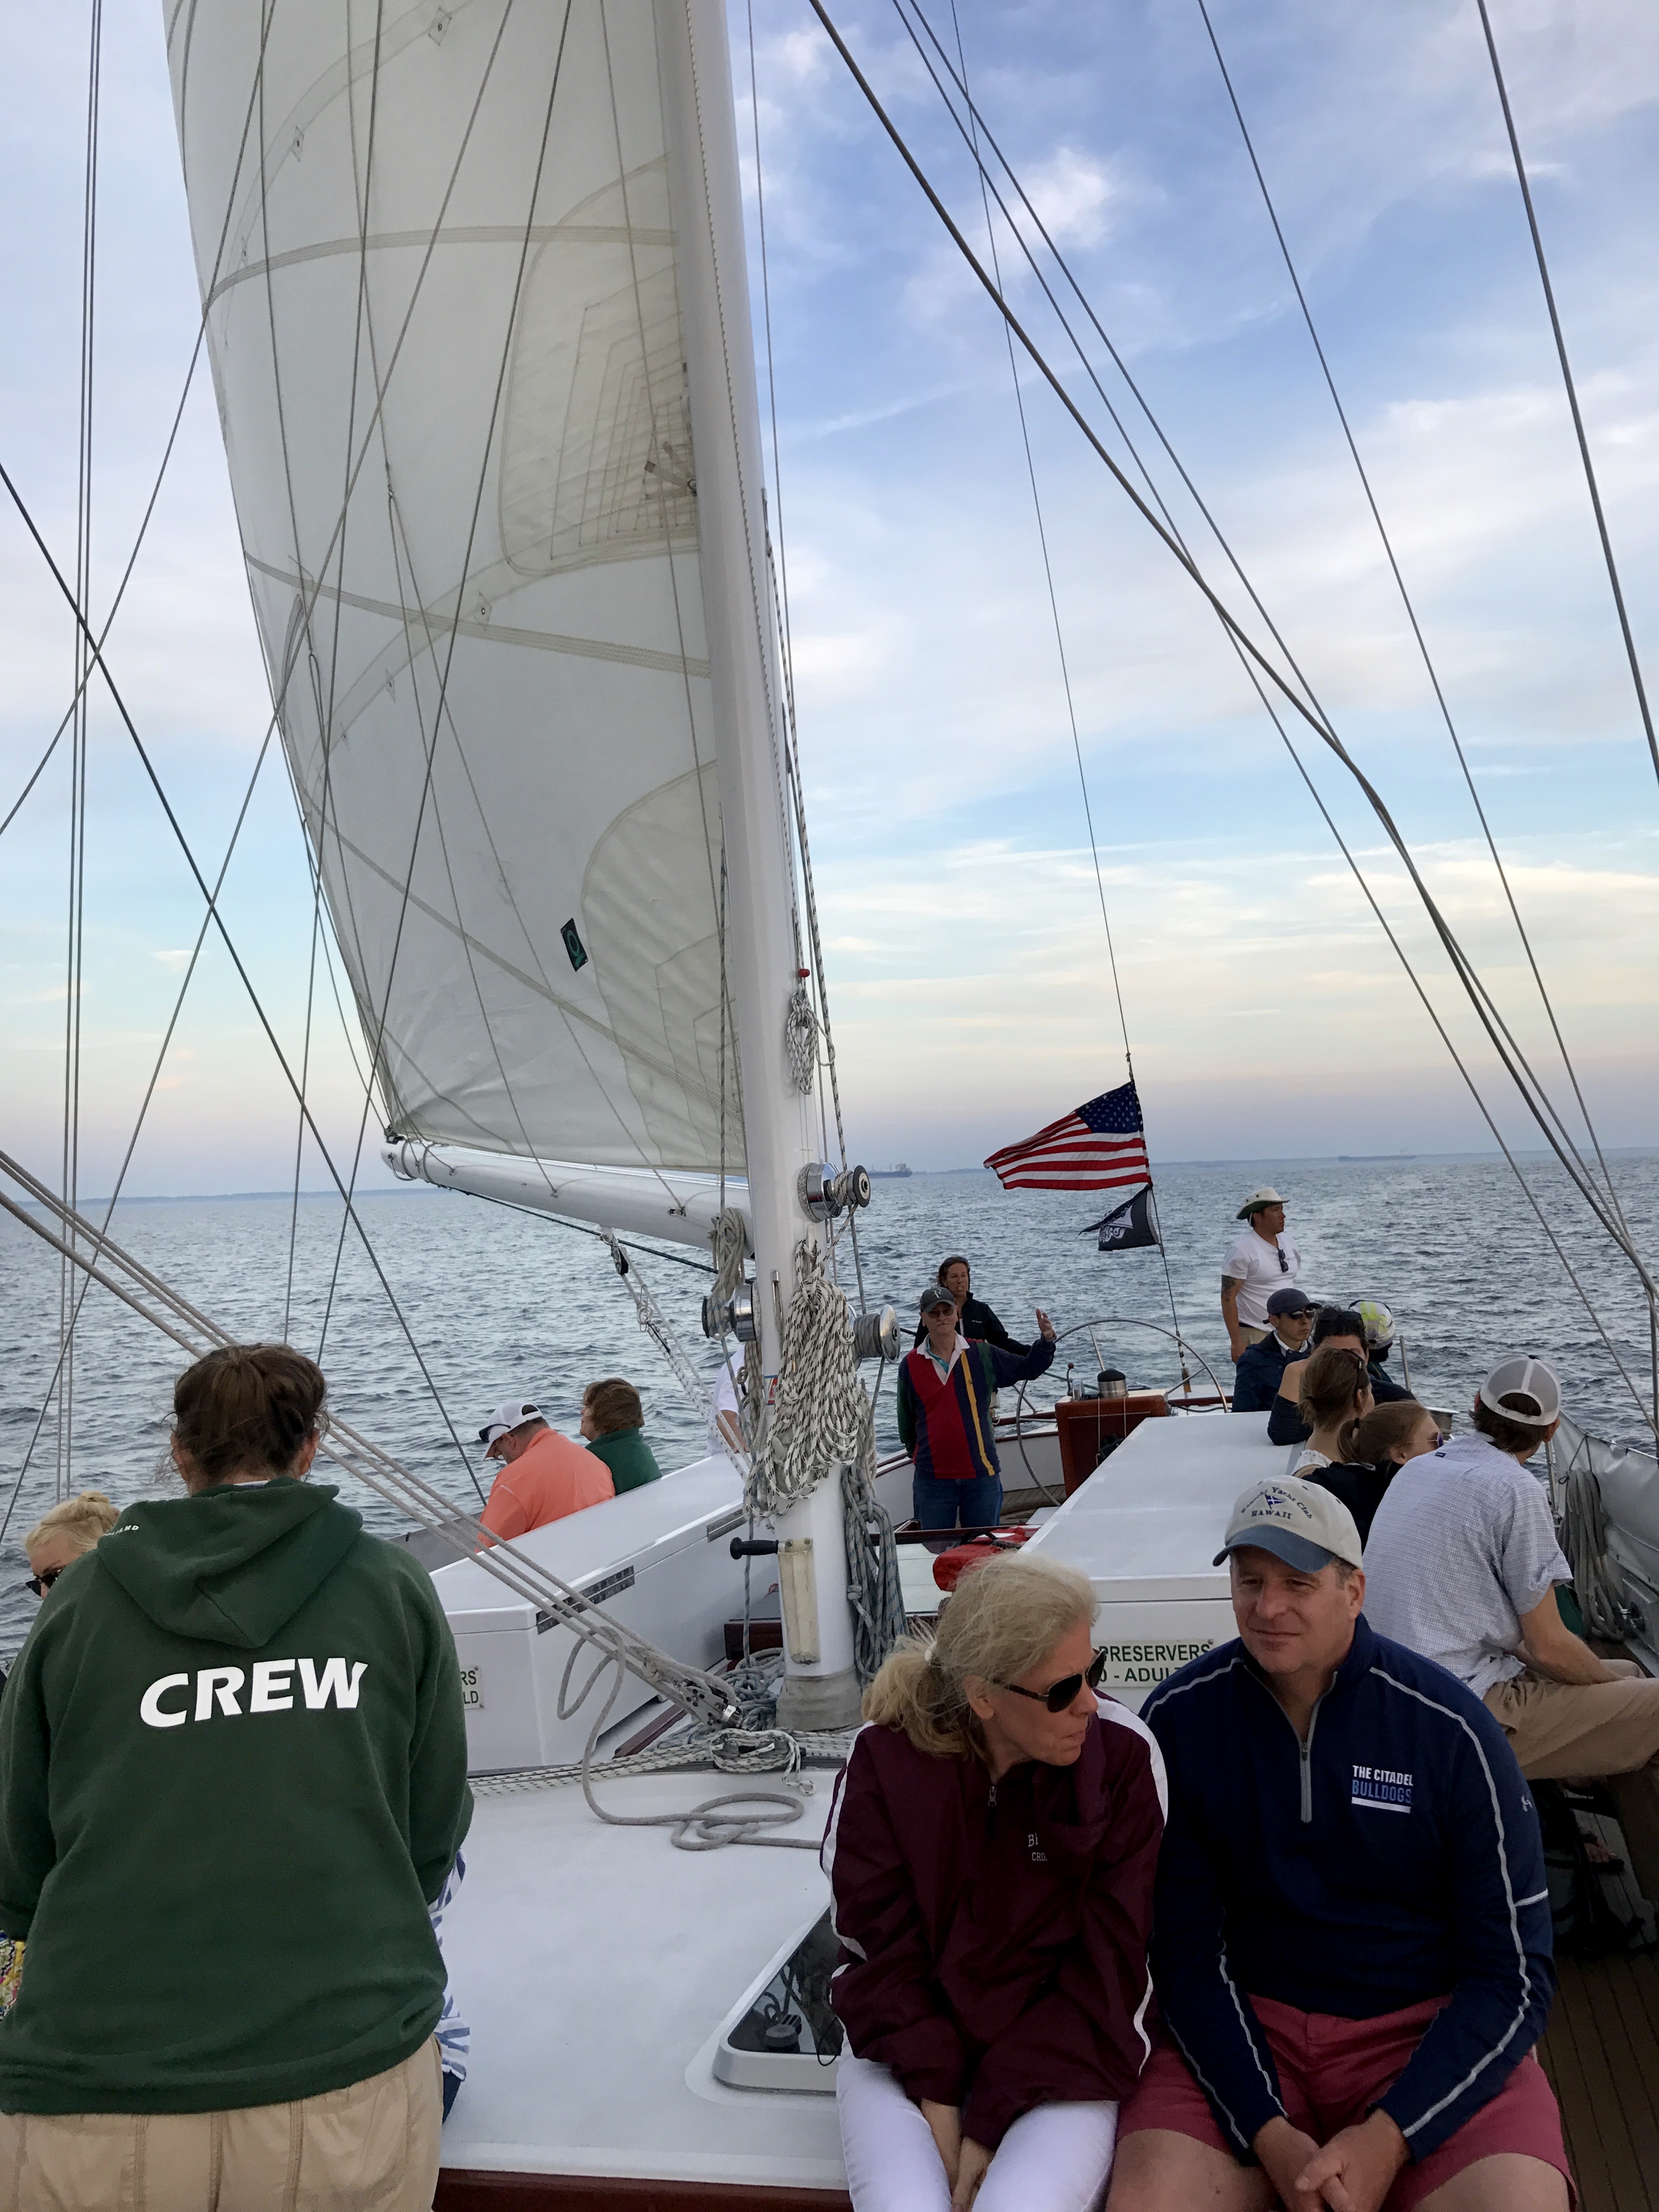 Guests and crew aboard the schooner on a windy day